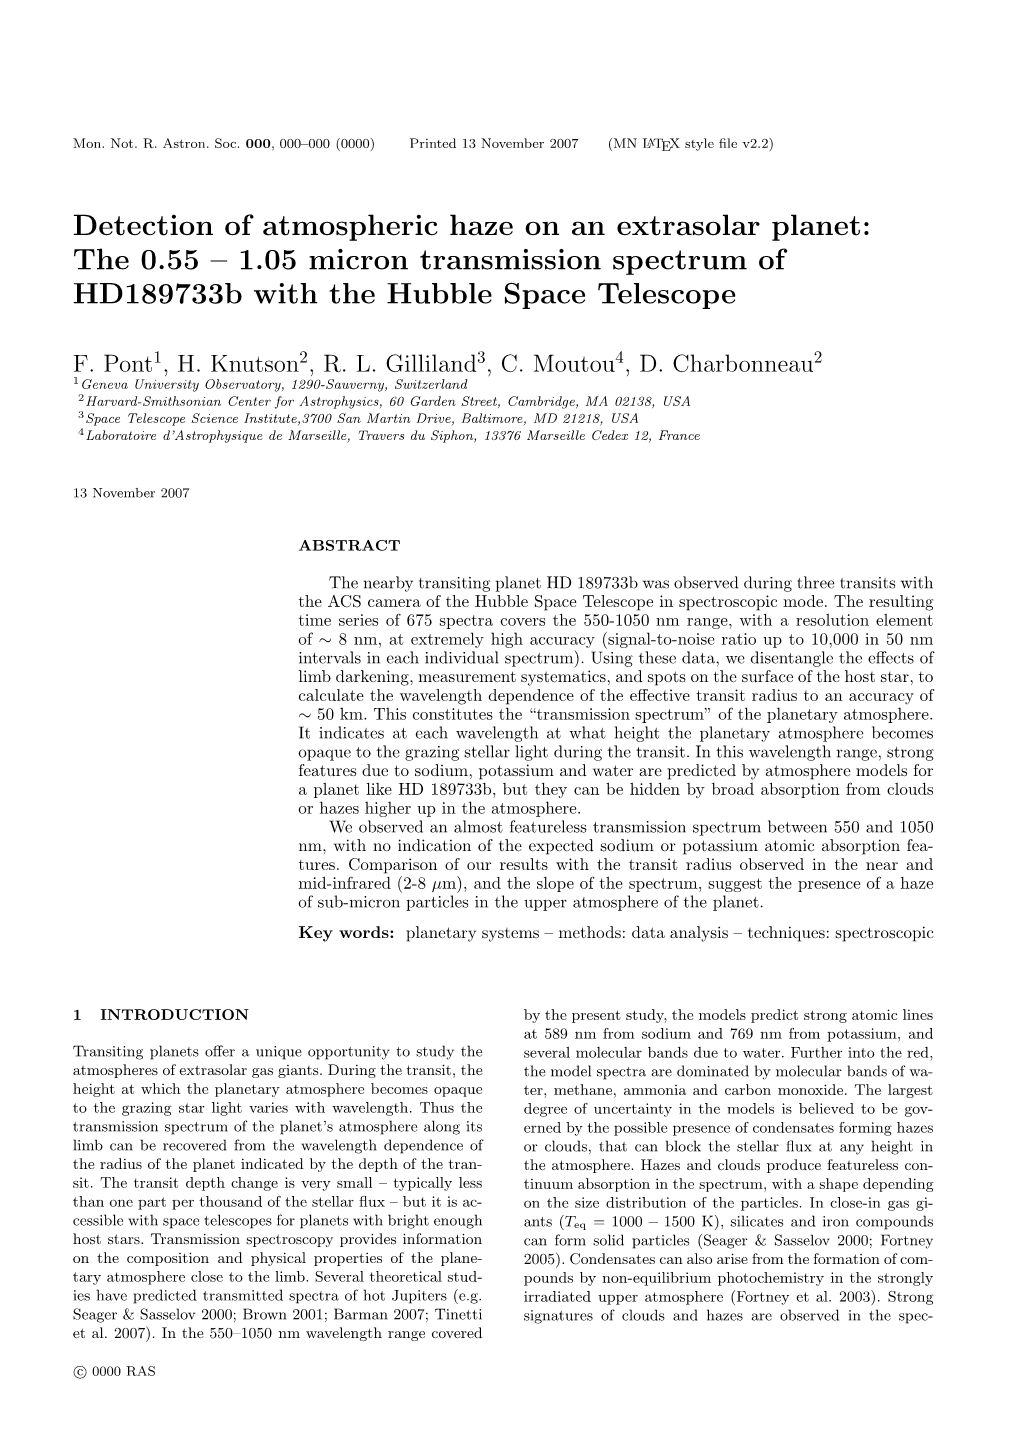 Detection of Atmospheric Haze on an Extrasolar Planet: the 0.55 – 1.05 Micron Transmission Spectrum of Hd189733b with the Hubble Space Telescope